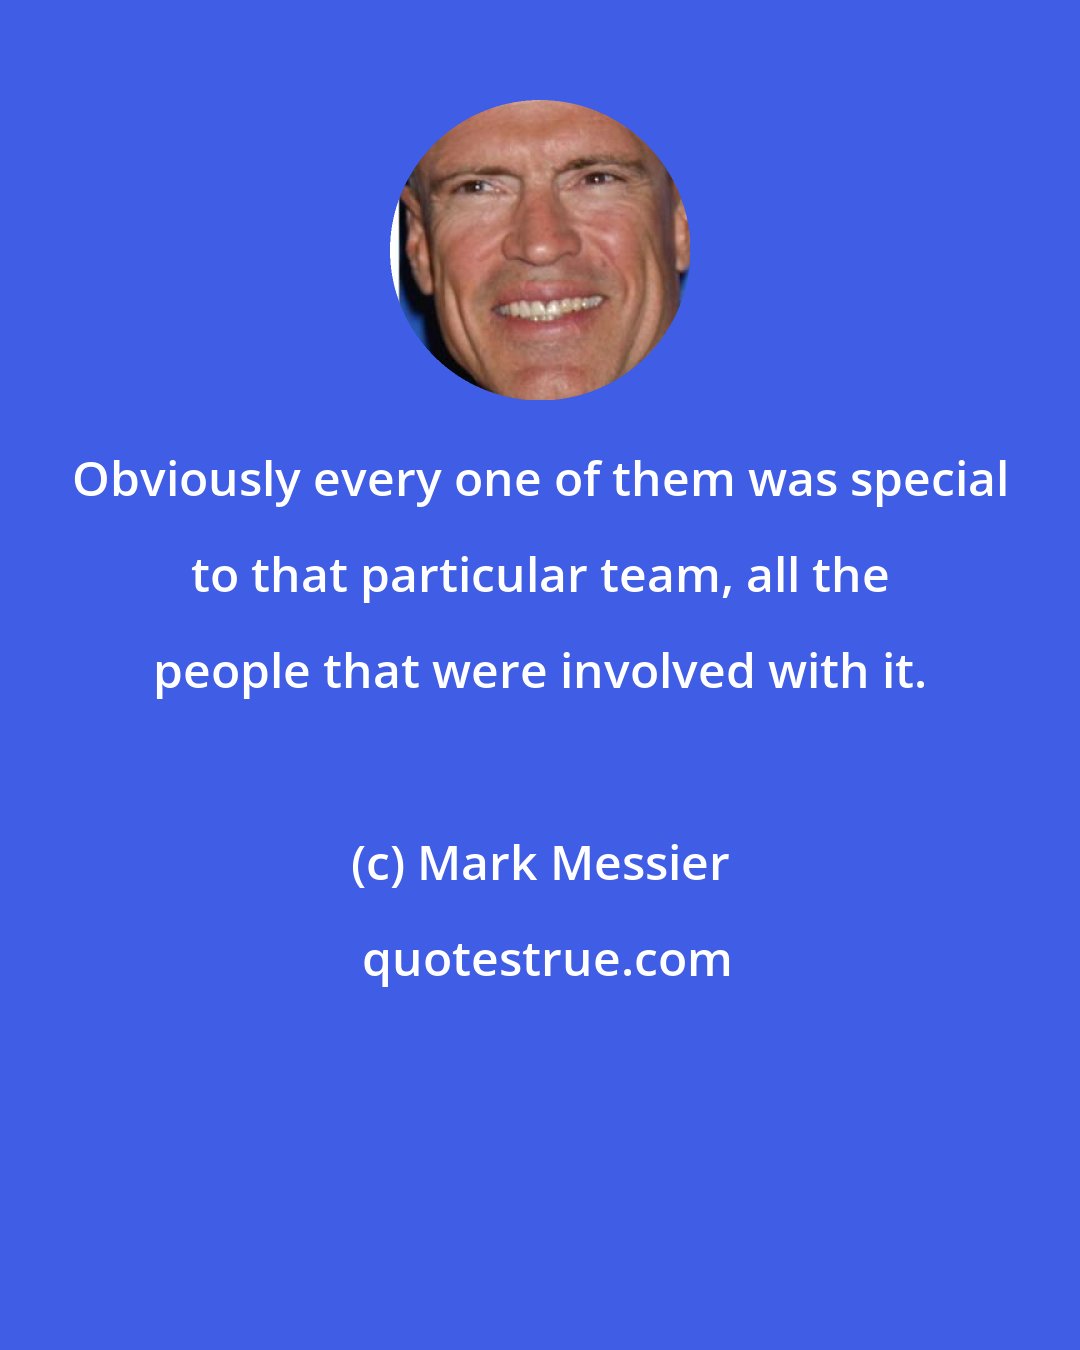 Mark Messier: Obviously every one of them was special to that particular team, all the people that were involved with it.